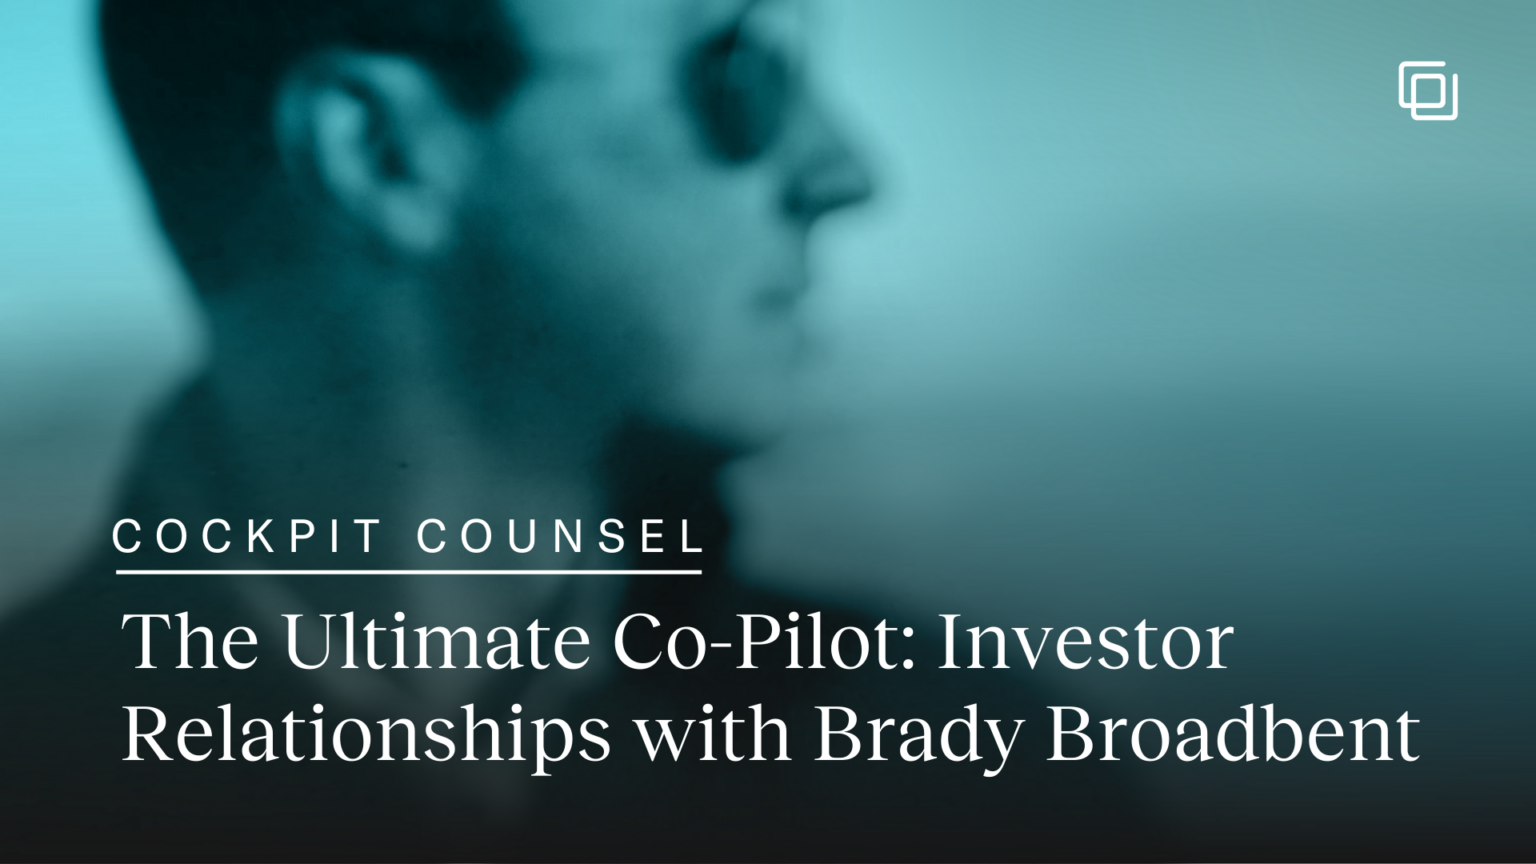 Cockpit Counsel: The Ultimate Co-Pilot: Investor Relationships with Brady Broadbent